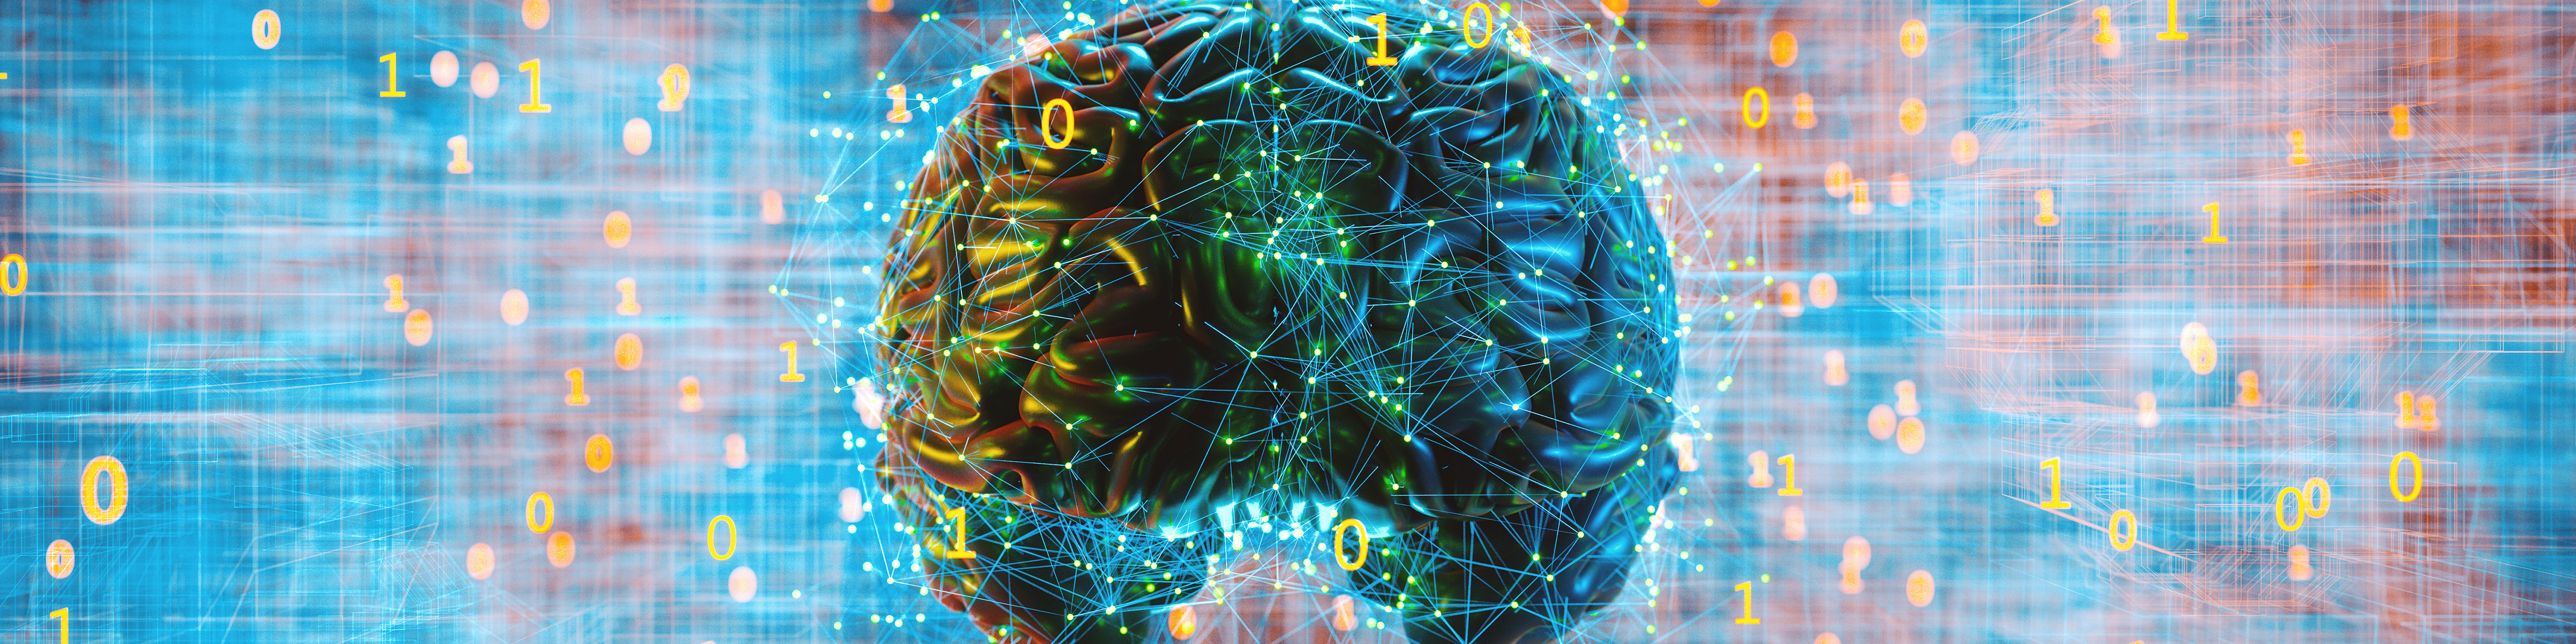 A digital reproduction of a brain surrounded by a network of representations of digital information, like 1s and 0s